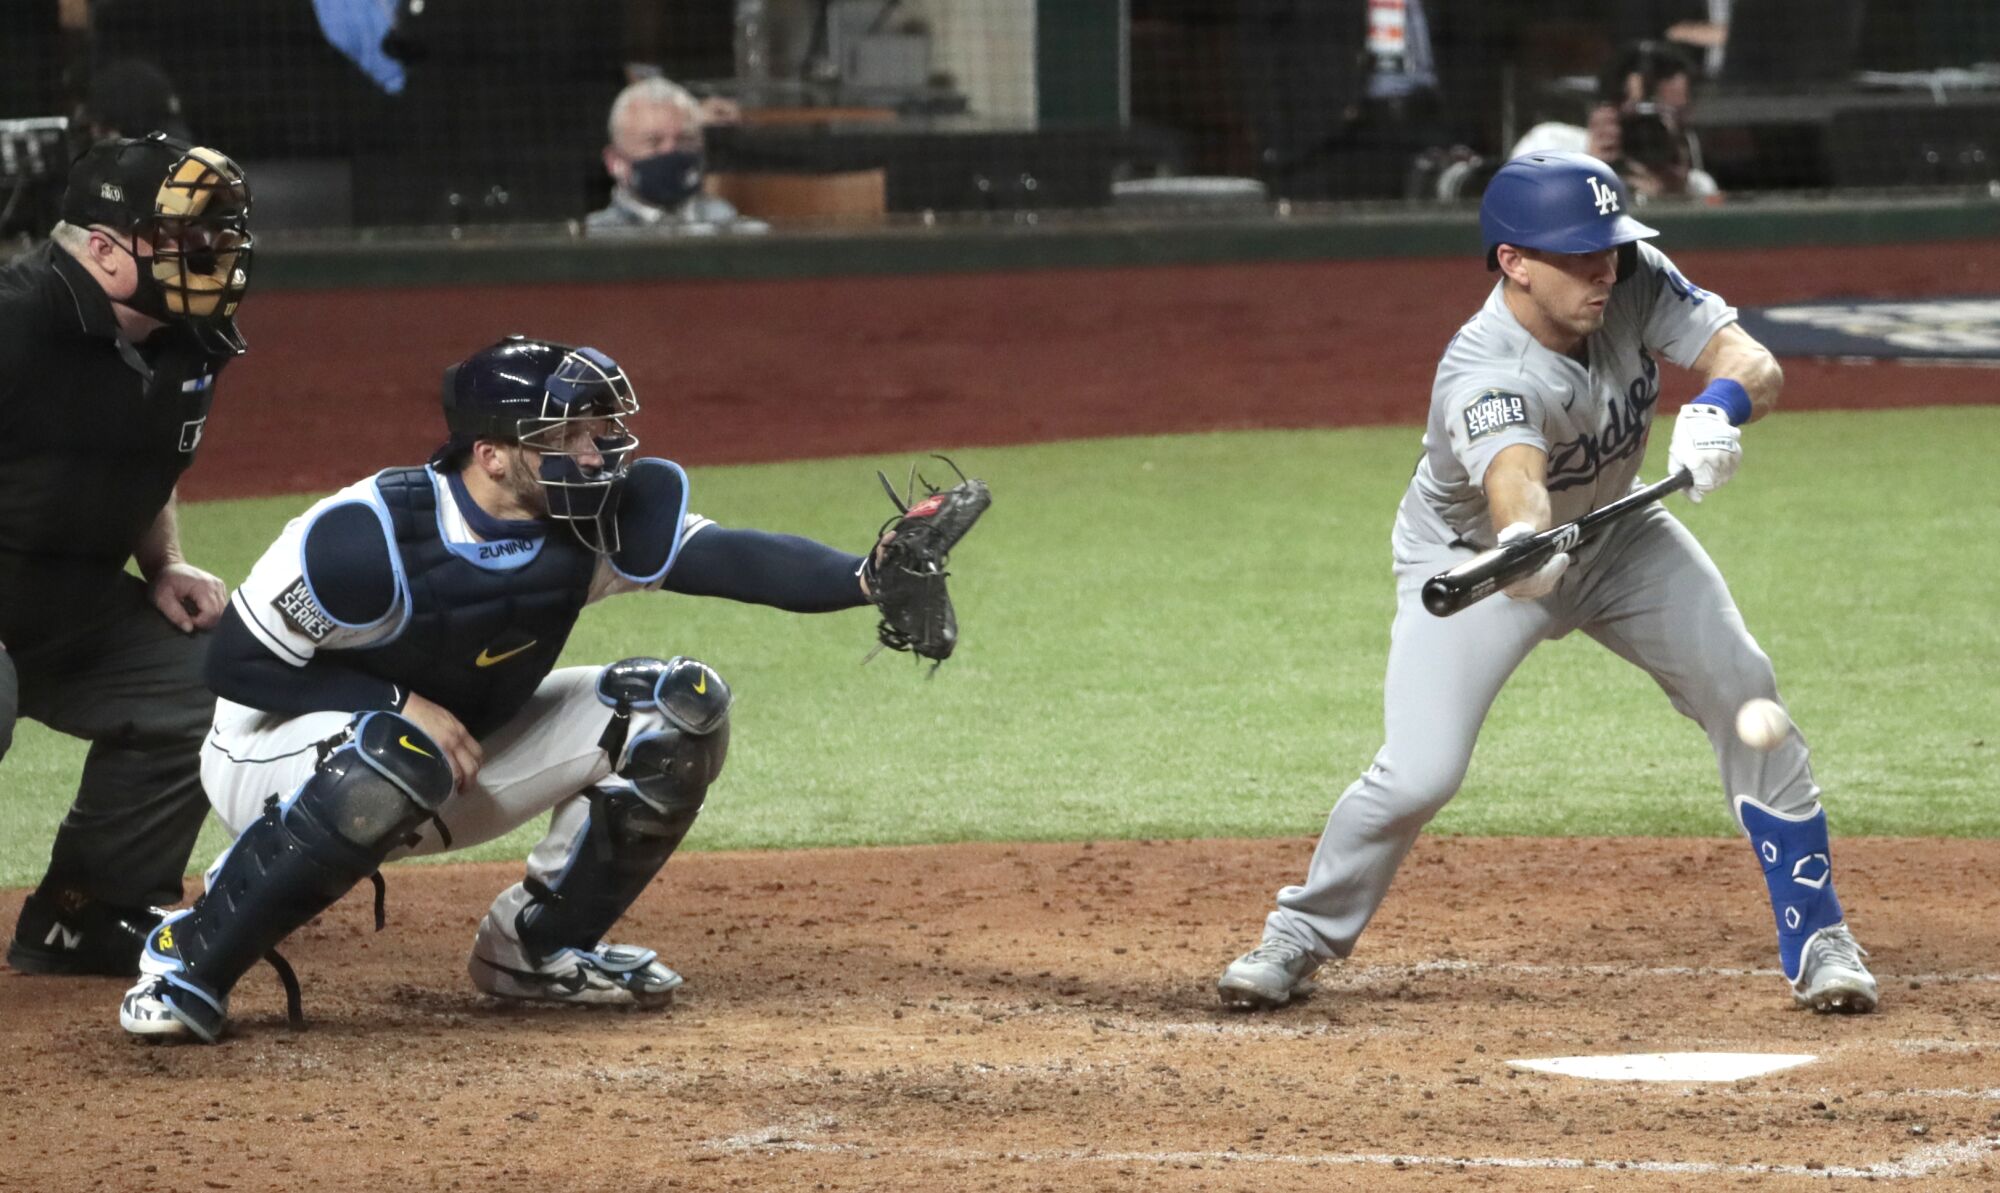 Dodgers catcher Austin Barnes lays down a sacrifice bunt to drive in a run during the fourth inning.